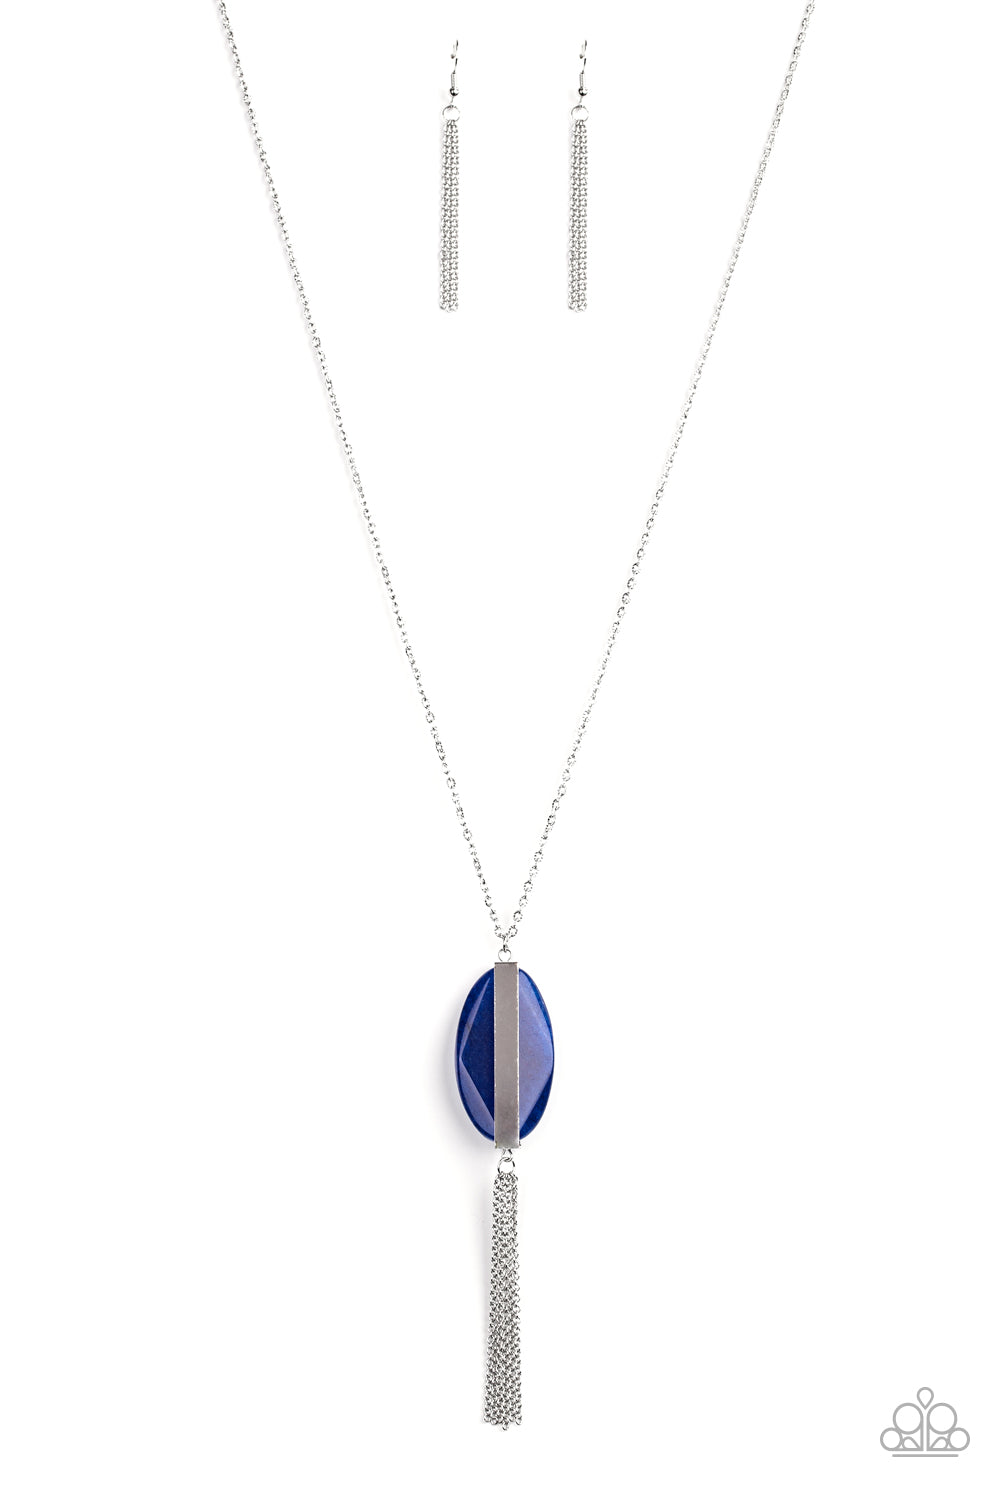 Tranquility Trend - blue - Paparazzi necklace